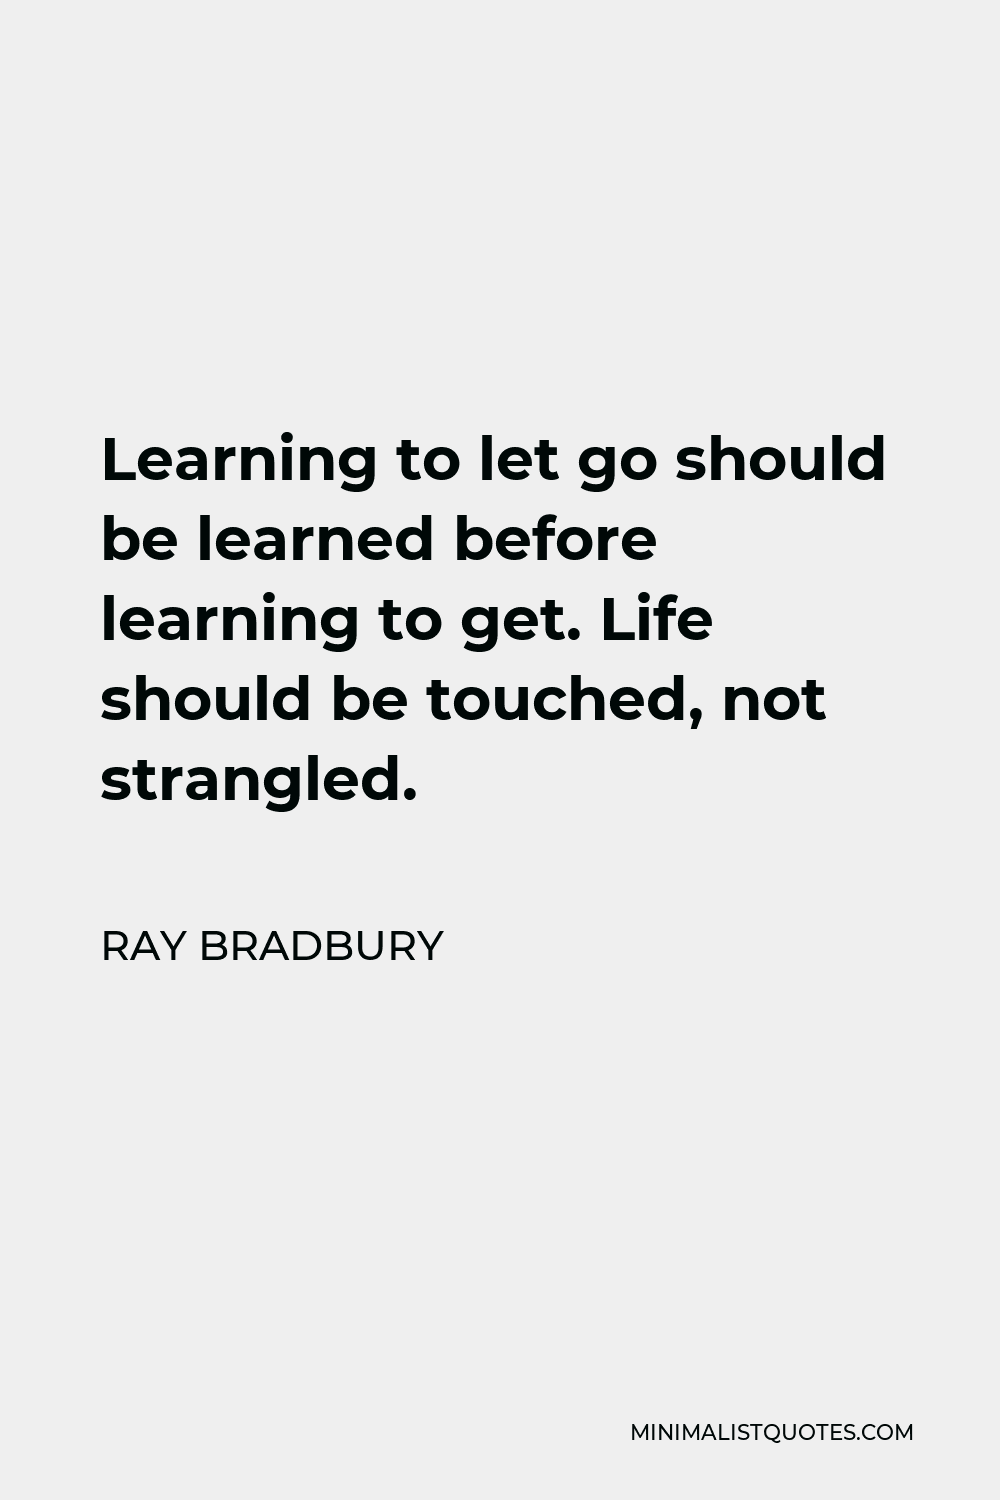 Ray Bradbury Quote - Learning to let go should be learned before learning to get. Life should be touched, not strangled.